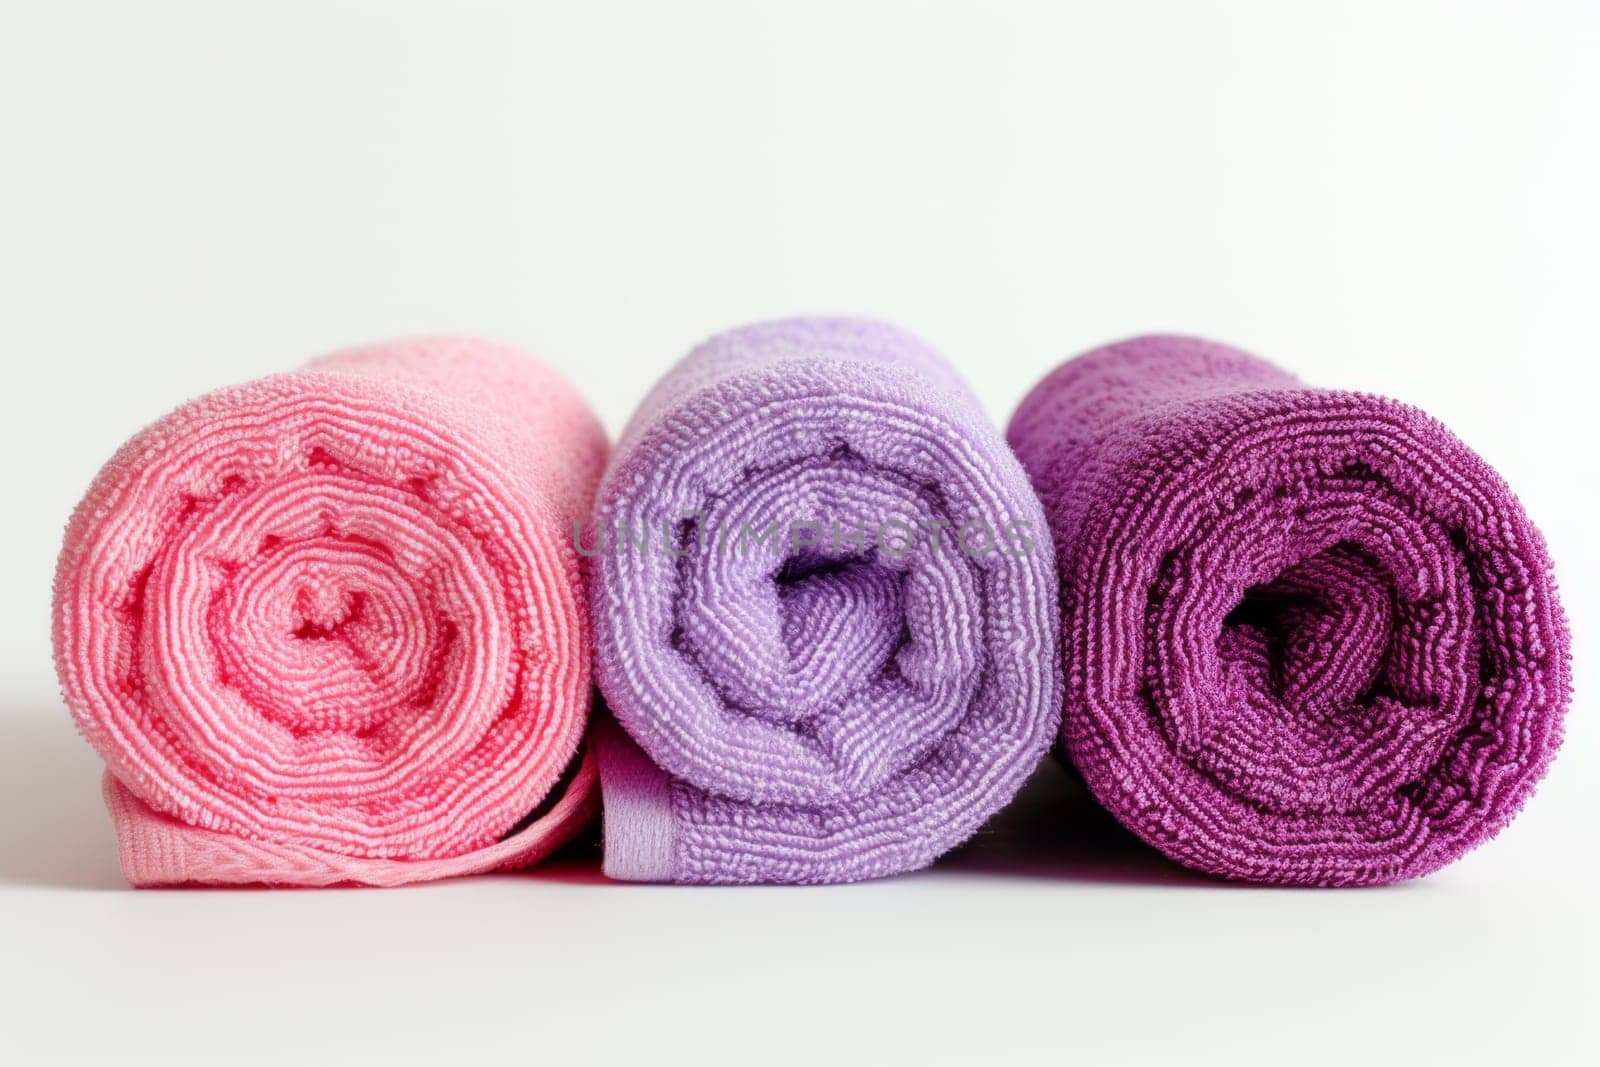 Clean pink and purple towels on a white insulated background.